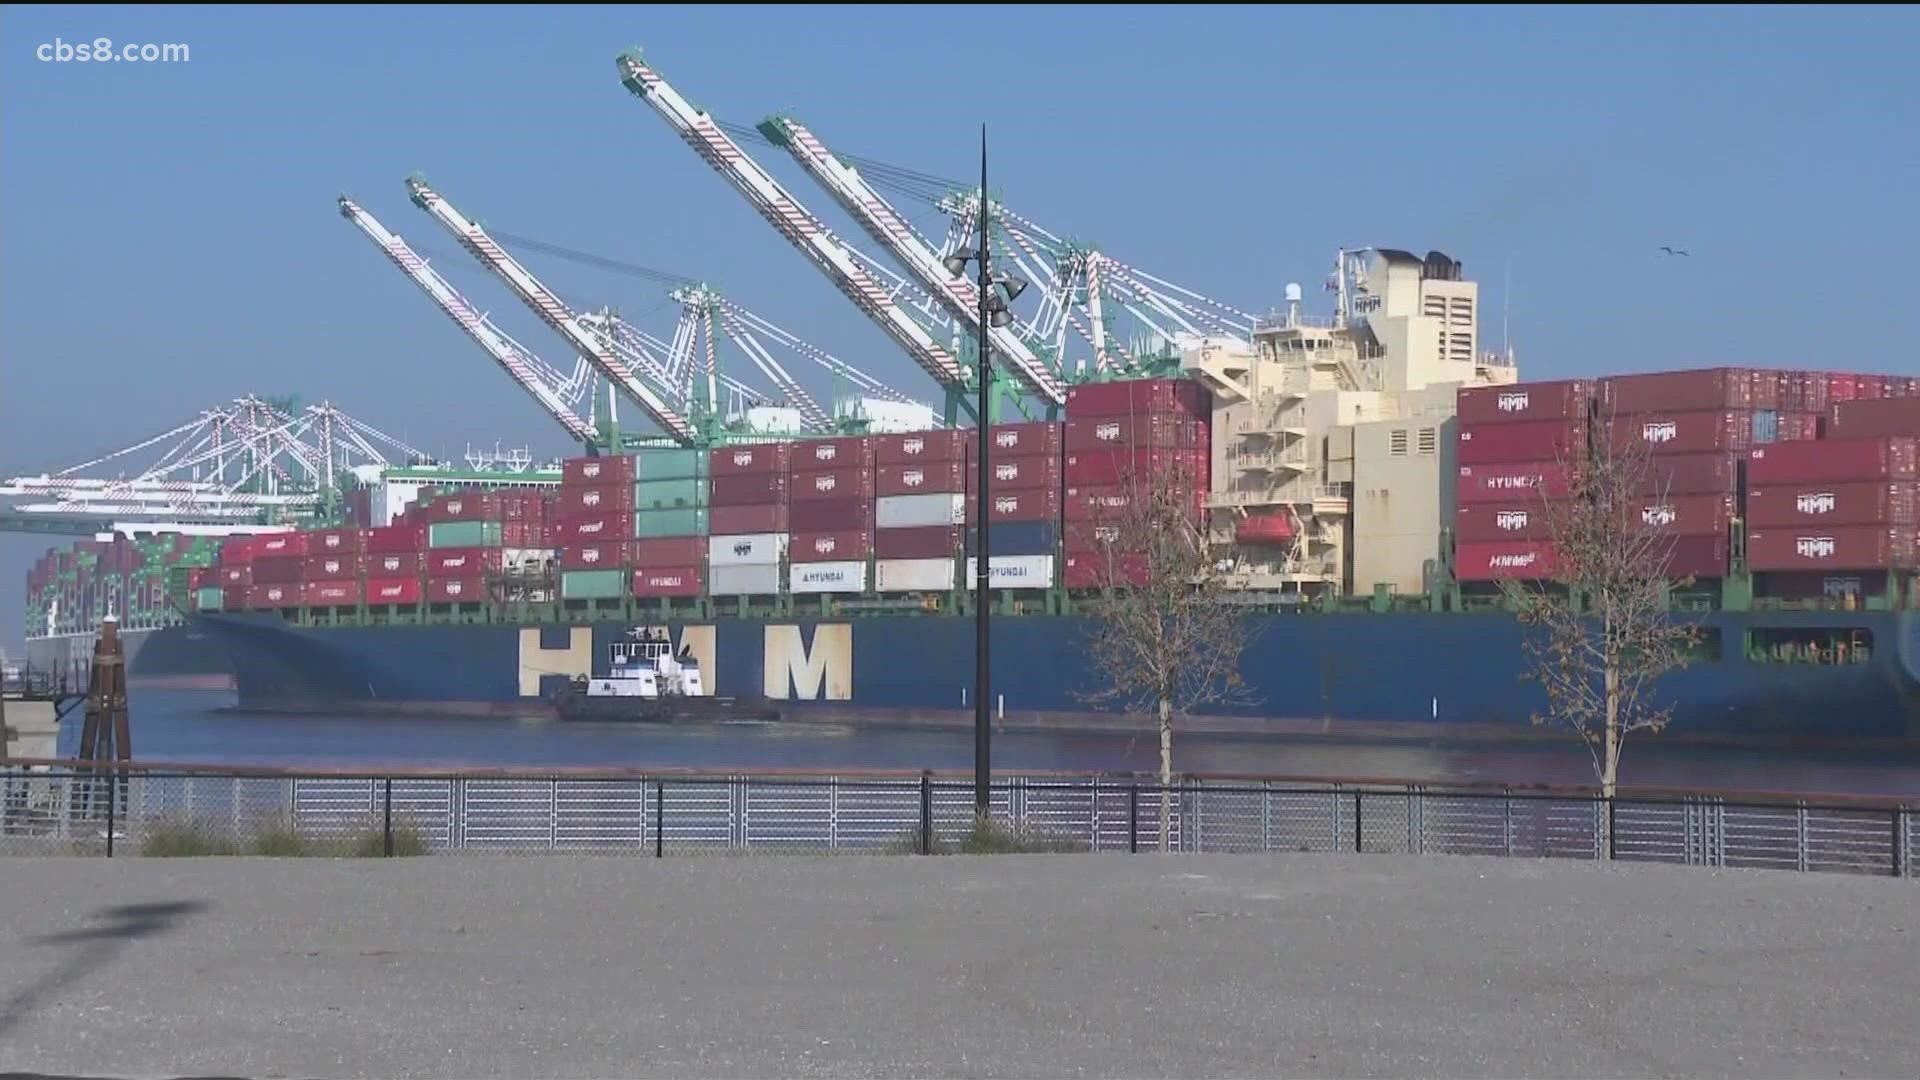 Walsh's visit Tuesday followed a report from the ports Monday of progress reducing the number of containers lingering at the terminals.